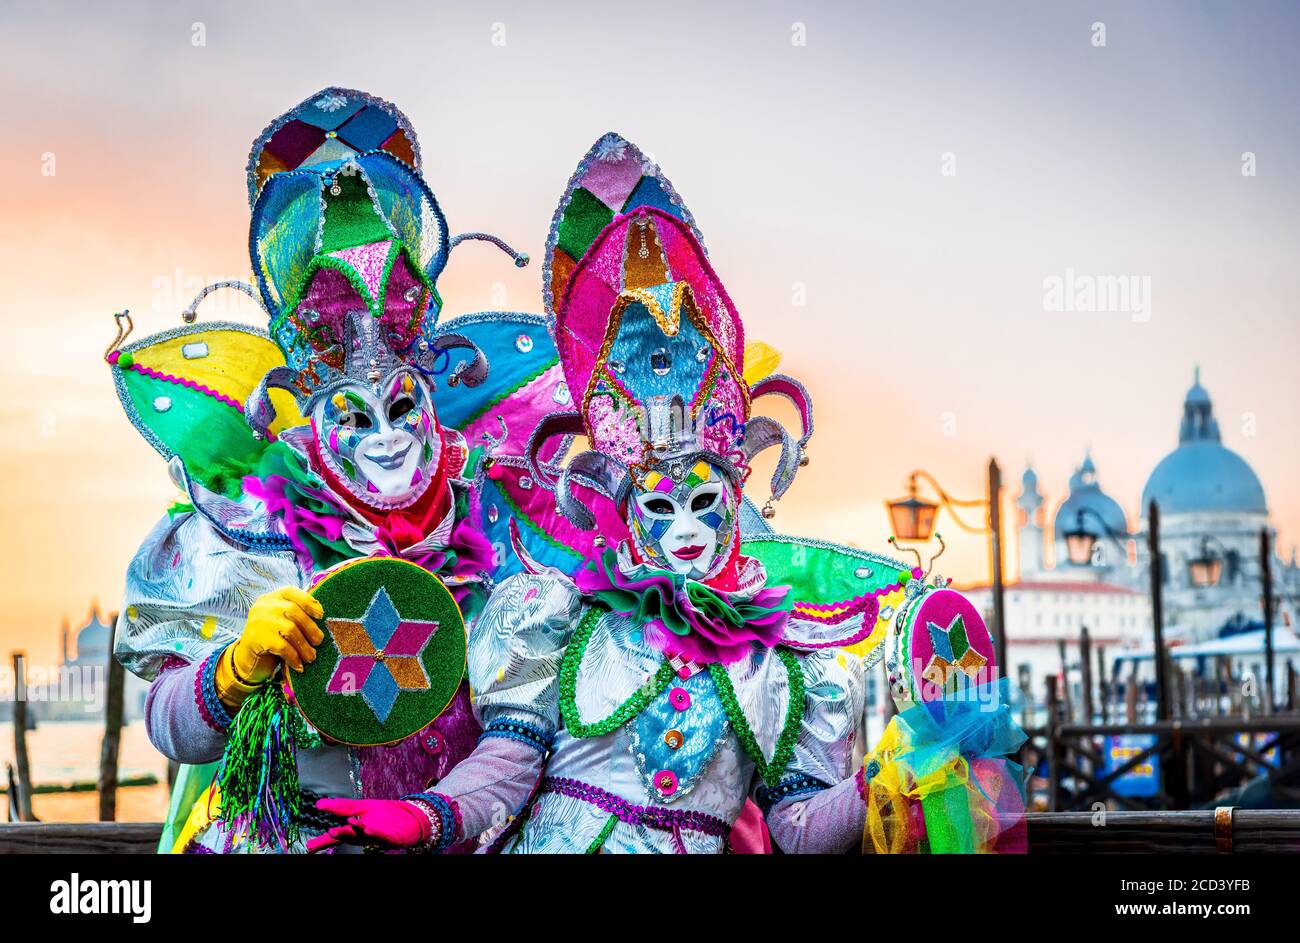 Venice, Italy, venetian masked model from the Venice Carnival, with Gondolas in the background, Grand Canal Stock Photo